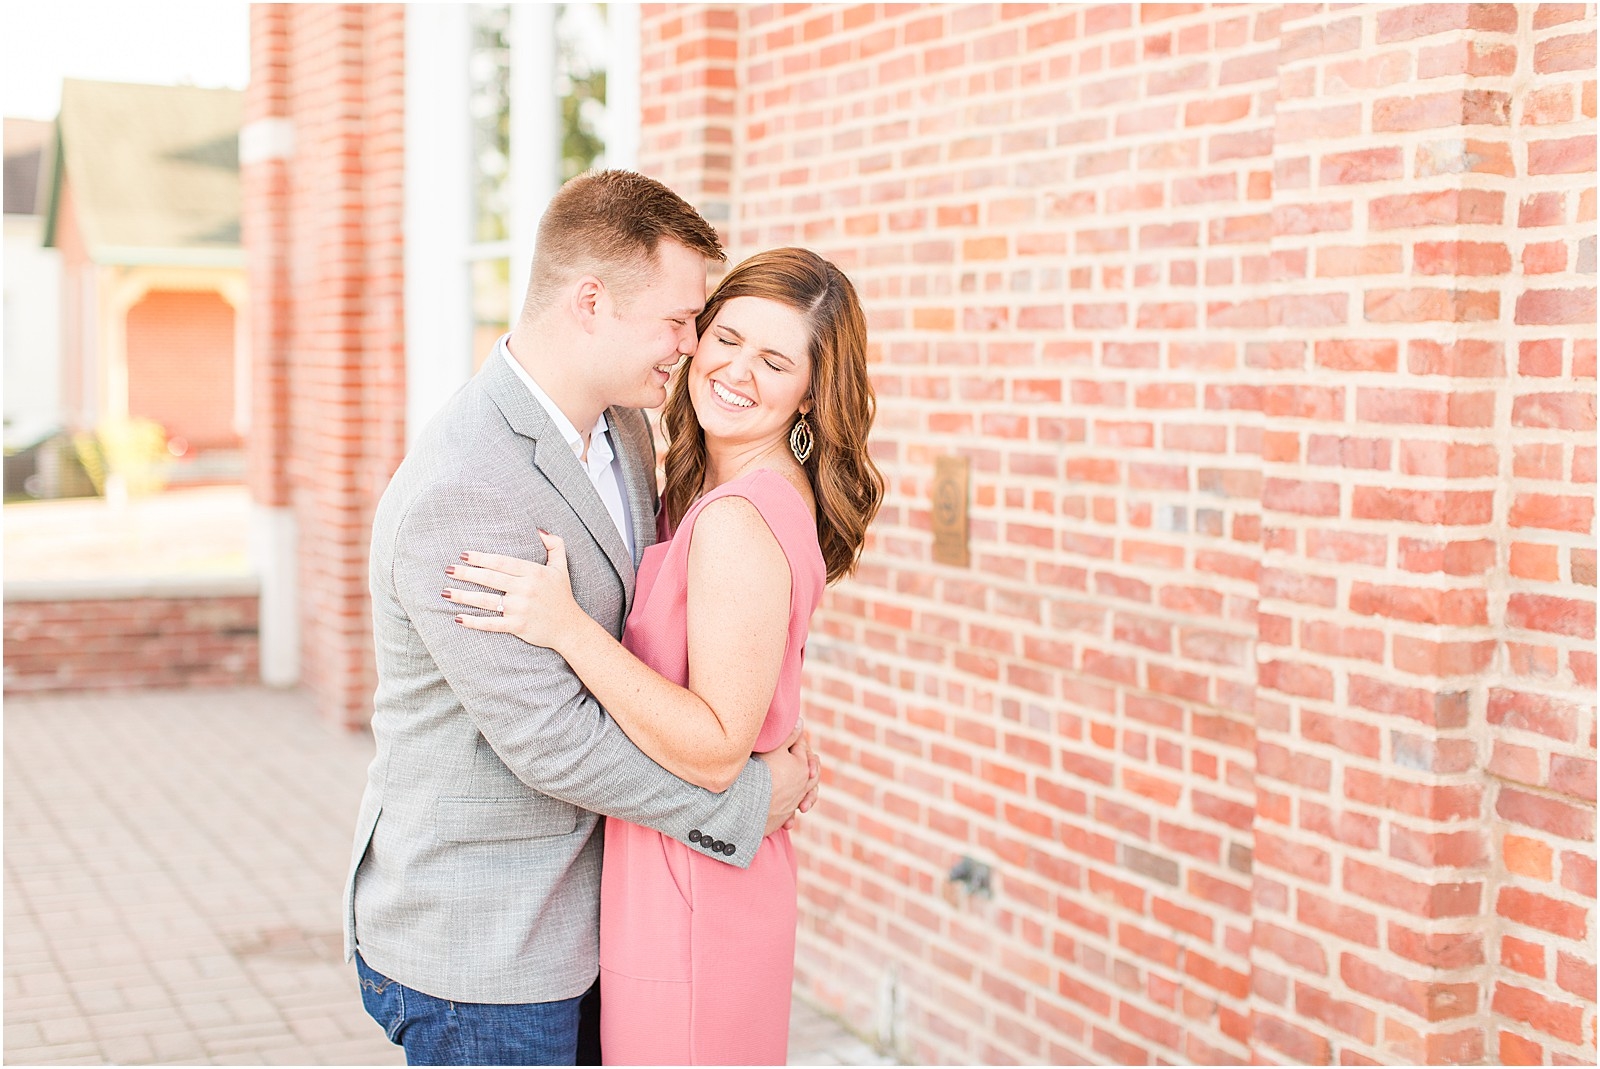 Downtown Huntingburgh Engagement Session | Gabby and Aidan | Bret and Brtandie Photography 005.jpg